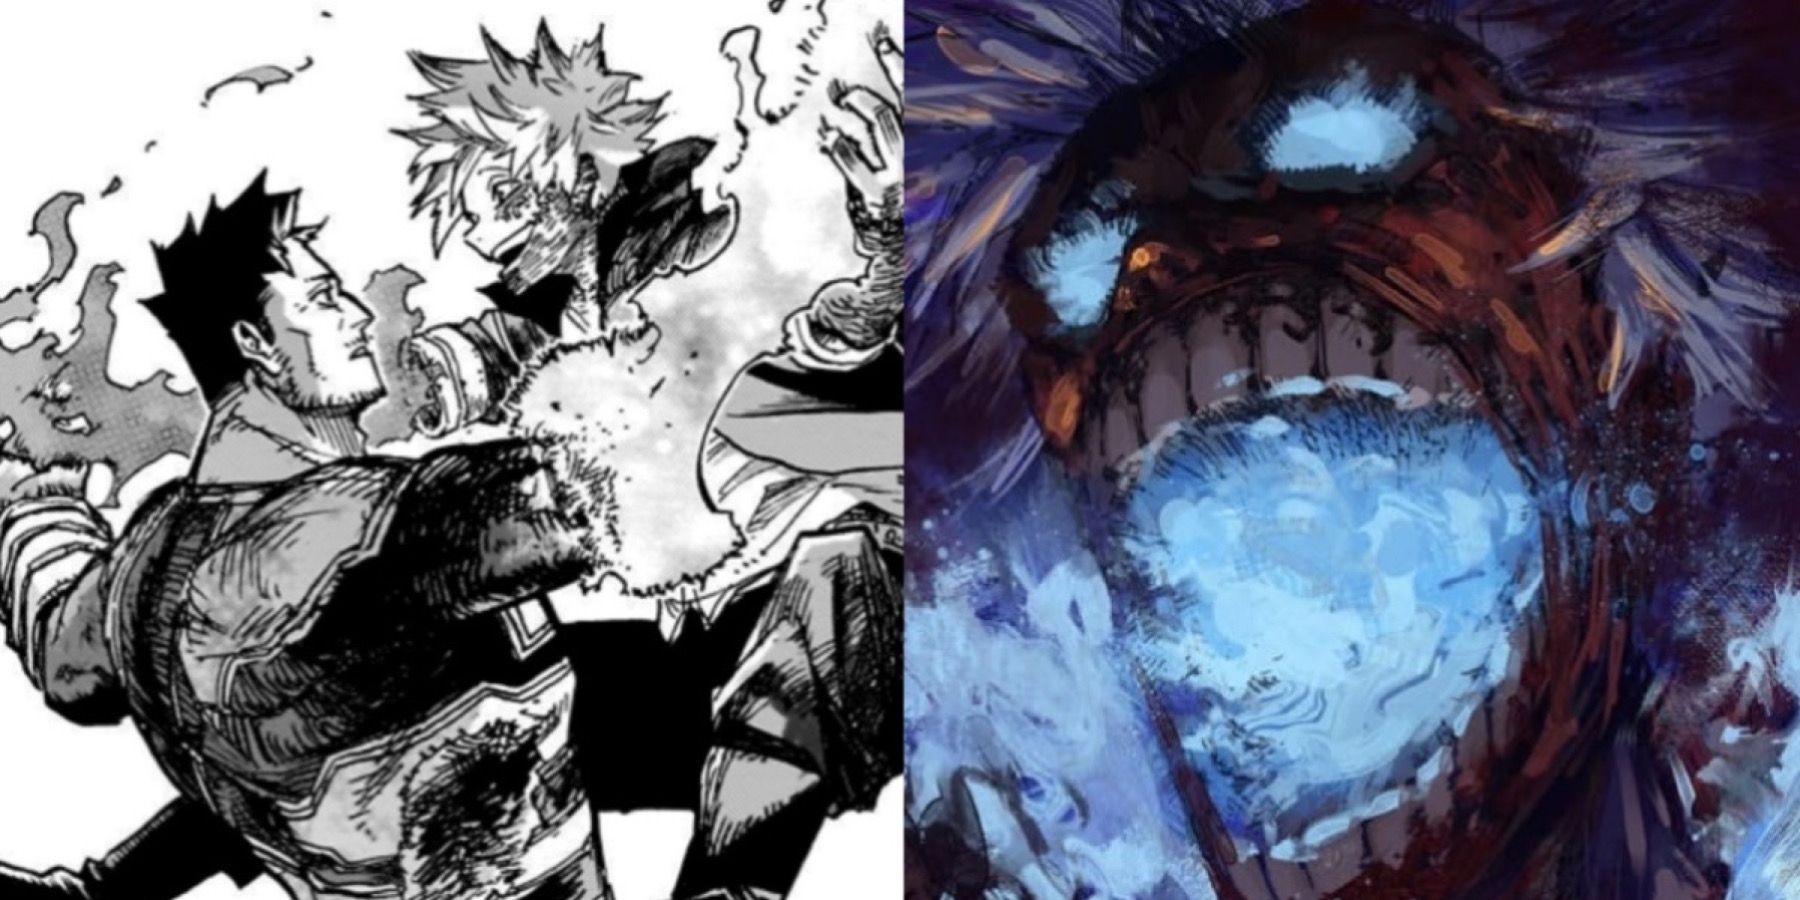 How Did Dabi Get His Scars? What Happened to Him?